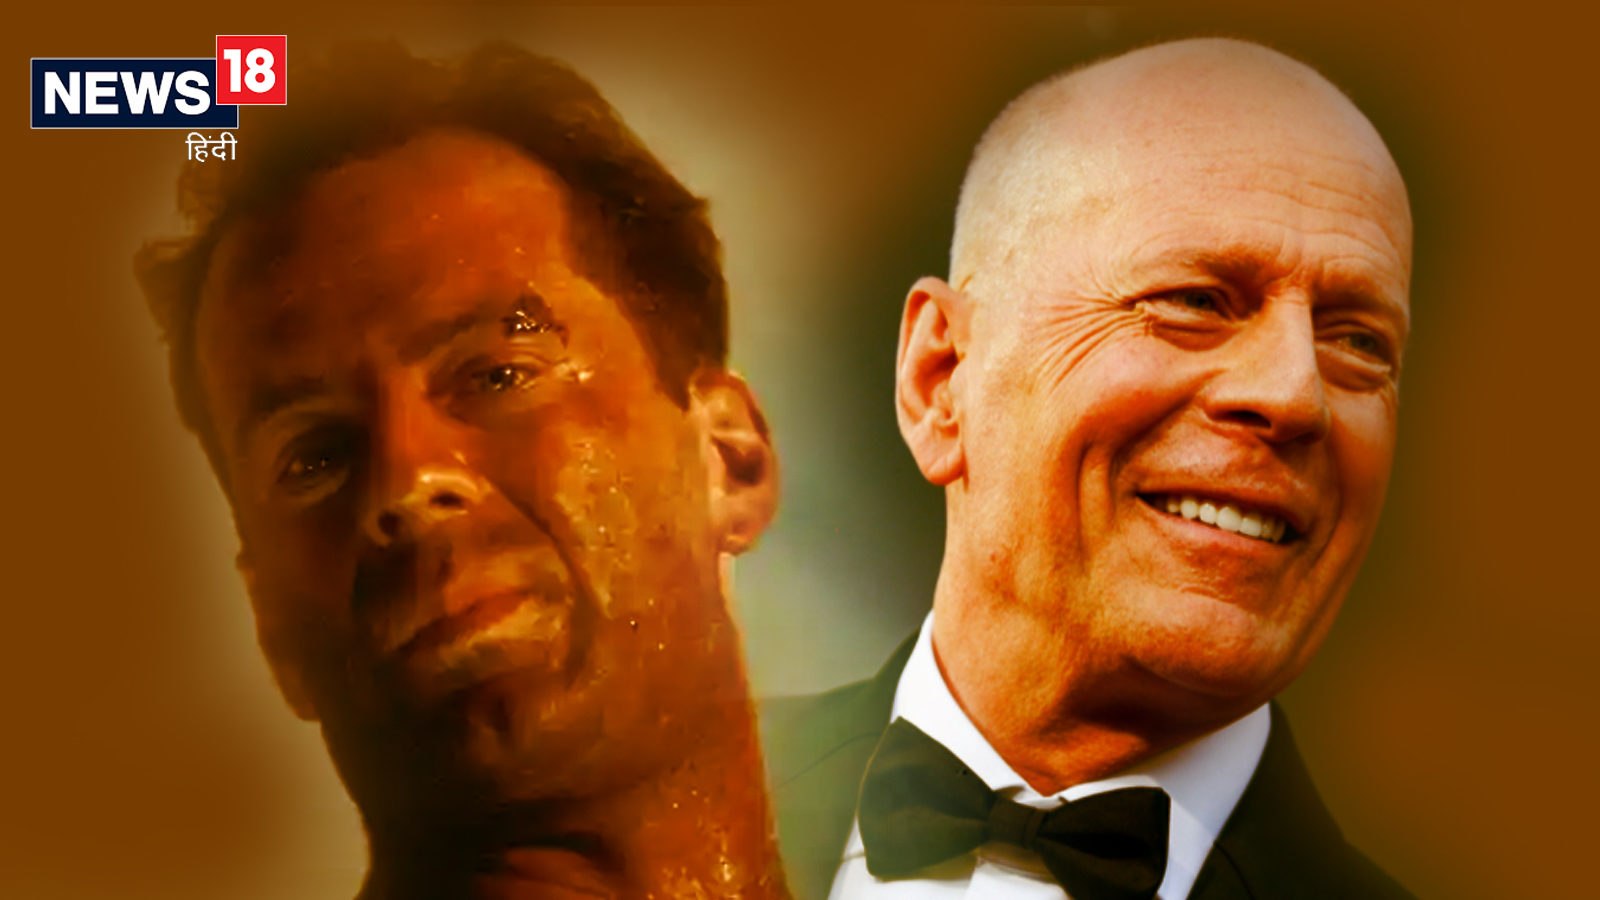 Bruce Willis said goodbye to the film industry, quit acting due to this disease
